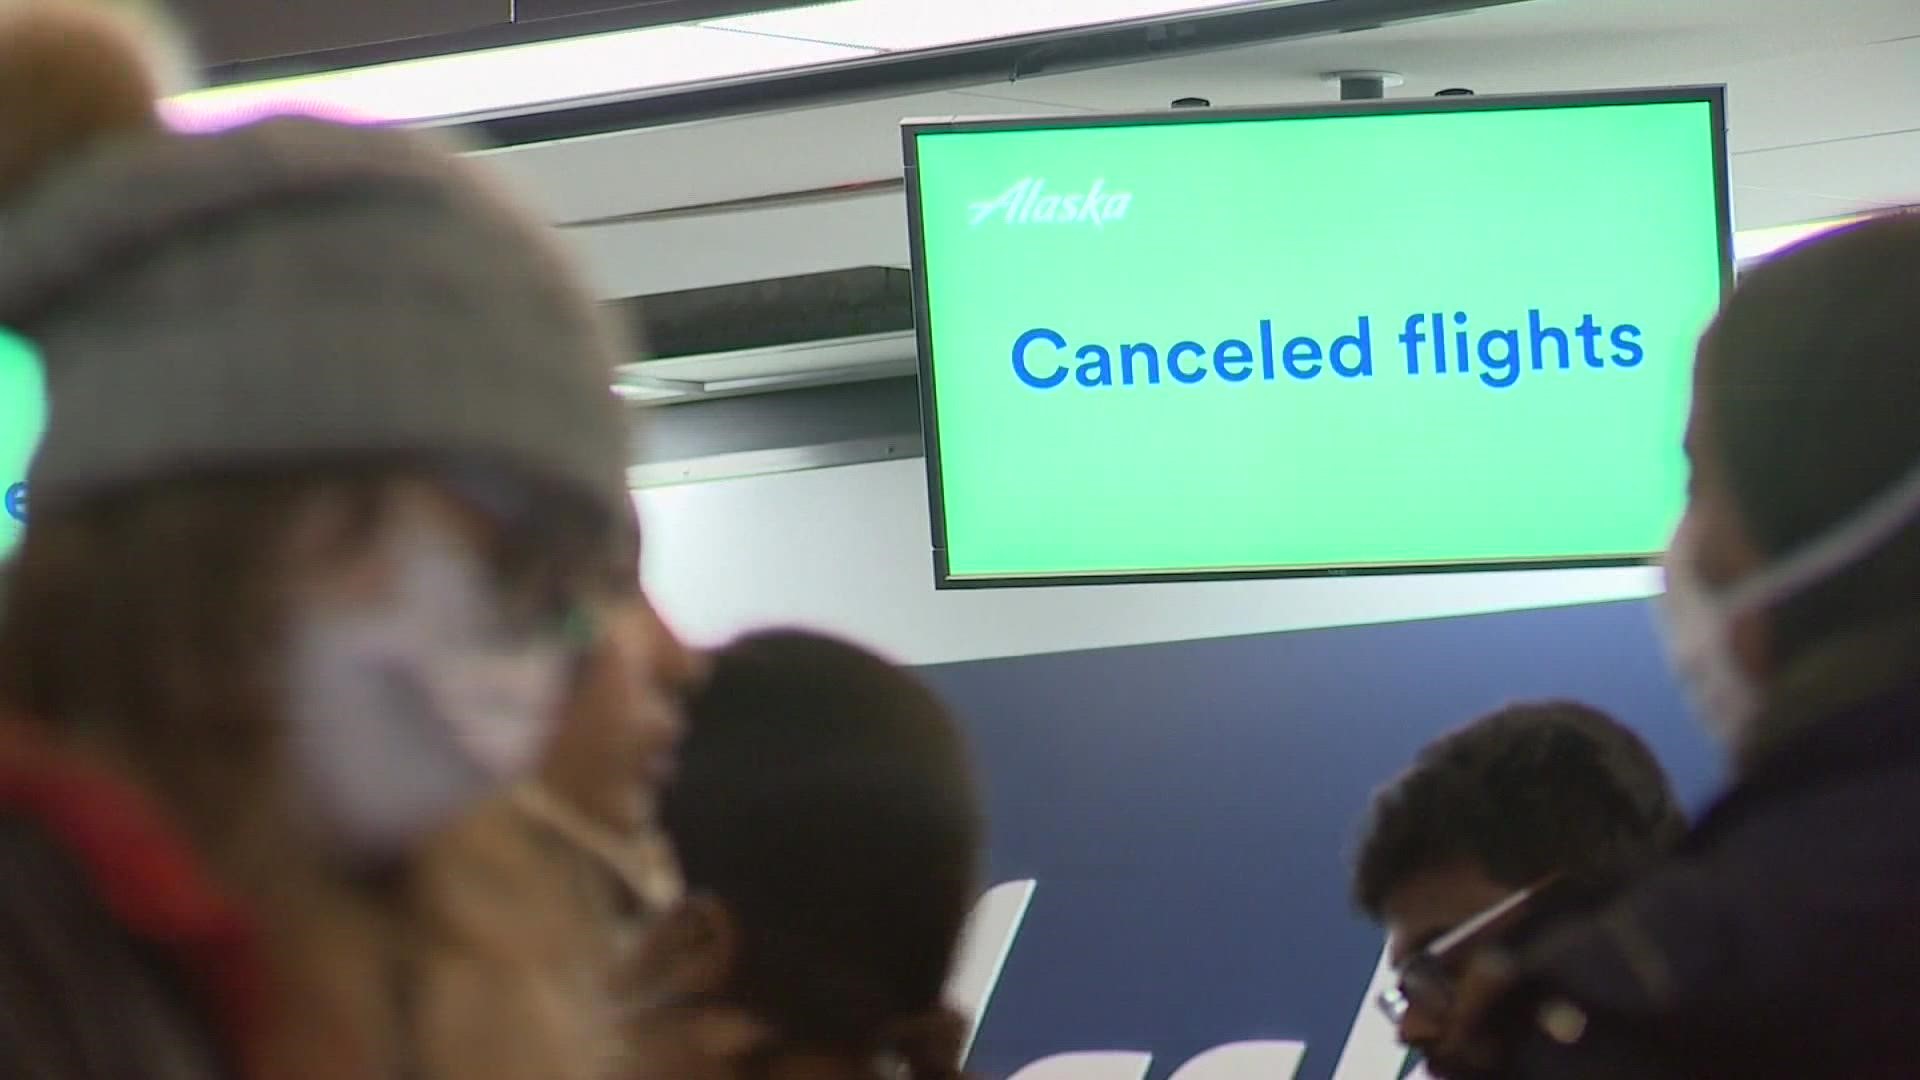 Southwest Airlines has accounted for the majority of delays and cancellations at Denver International Airport, continuing travel woes that began last week.